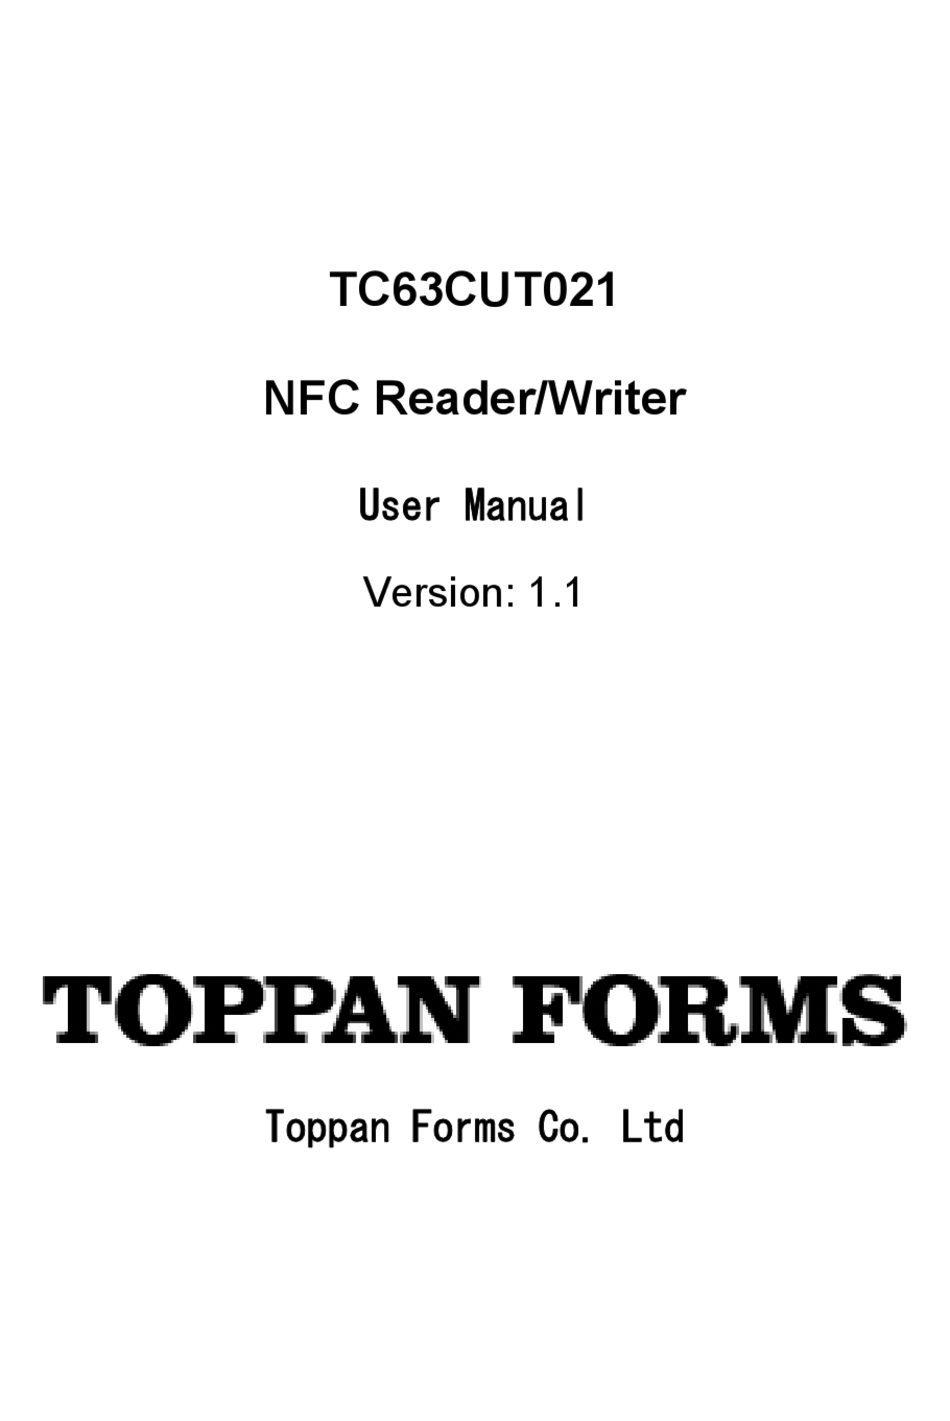 Download Toppan Forms Driver